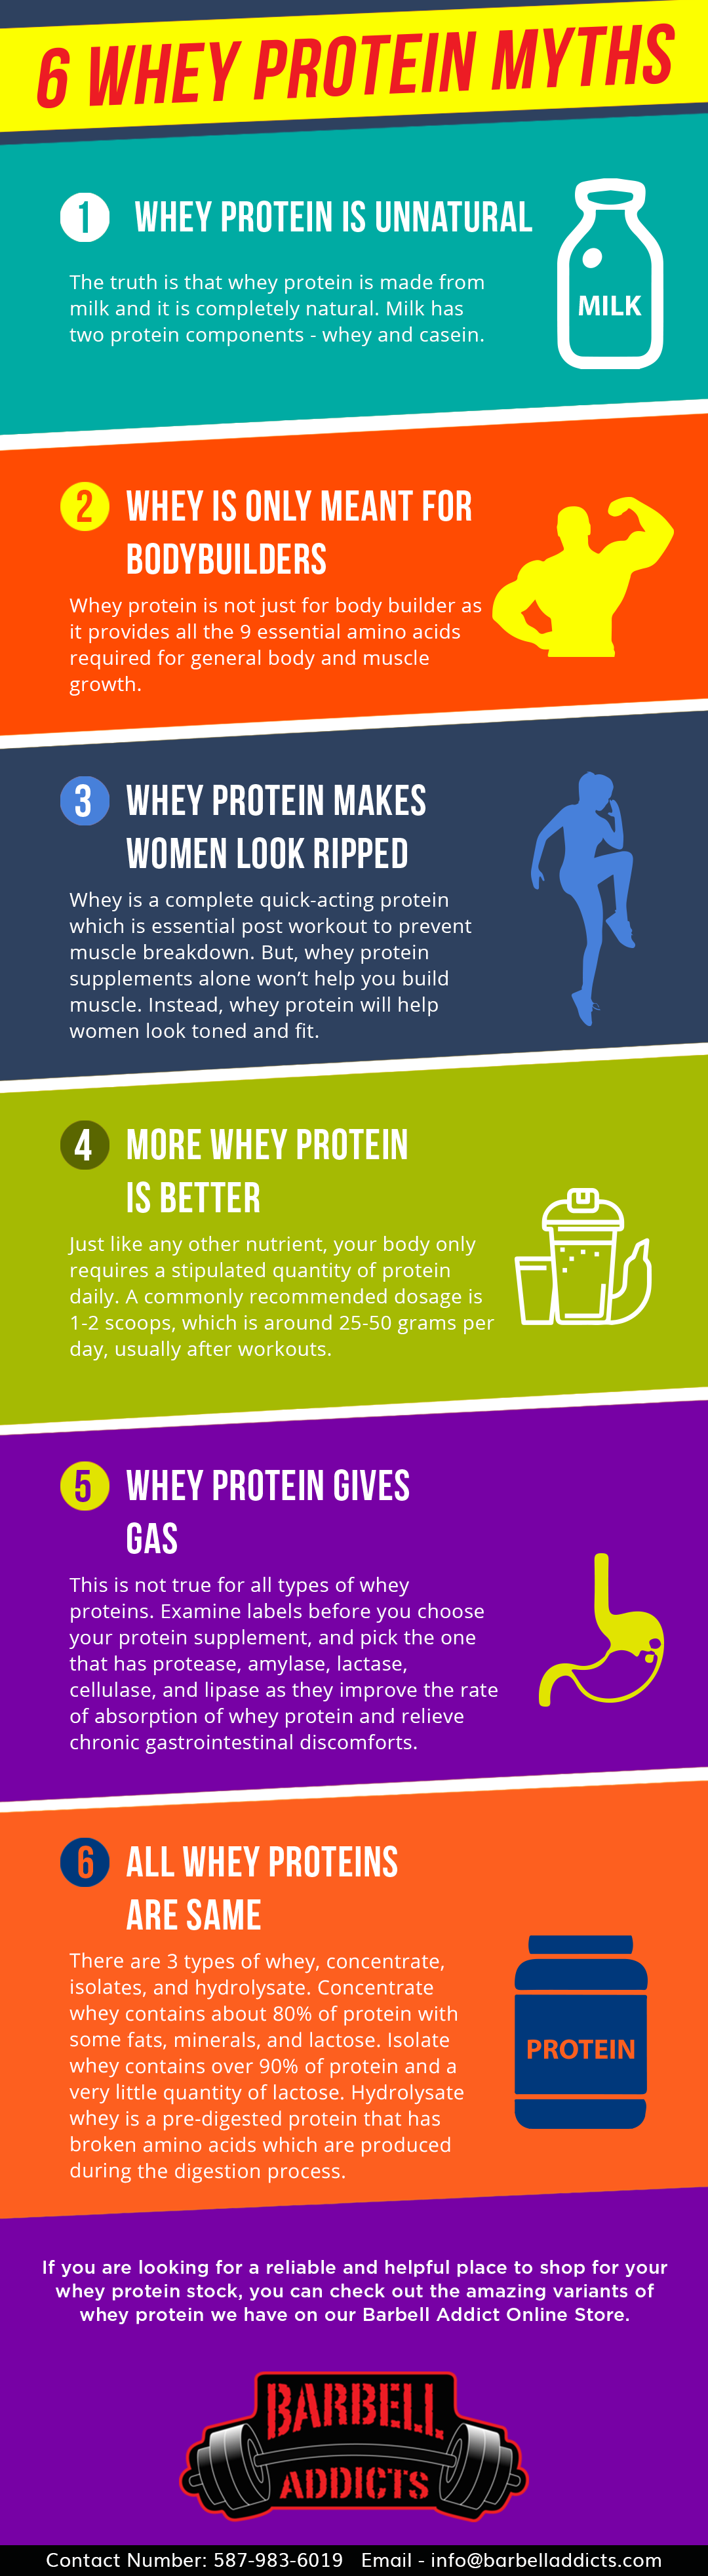 6 Myths About Protein Shakes For Kids, According To Nutritionists